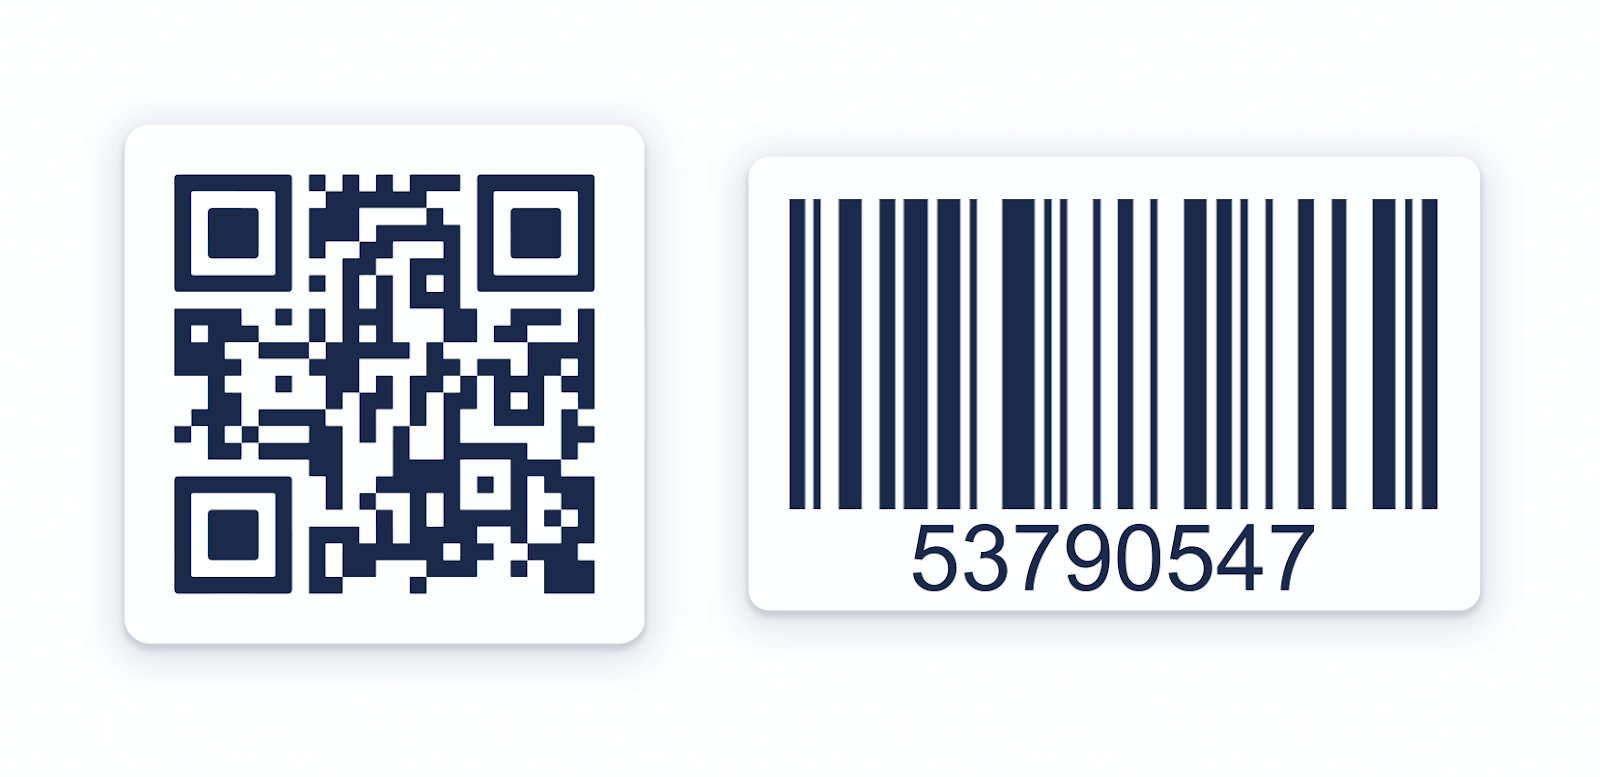 Example of a QR Code vs. a traditional barcode